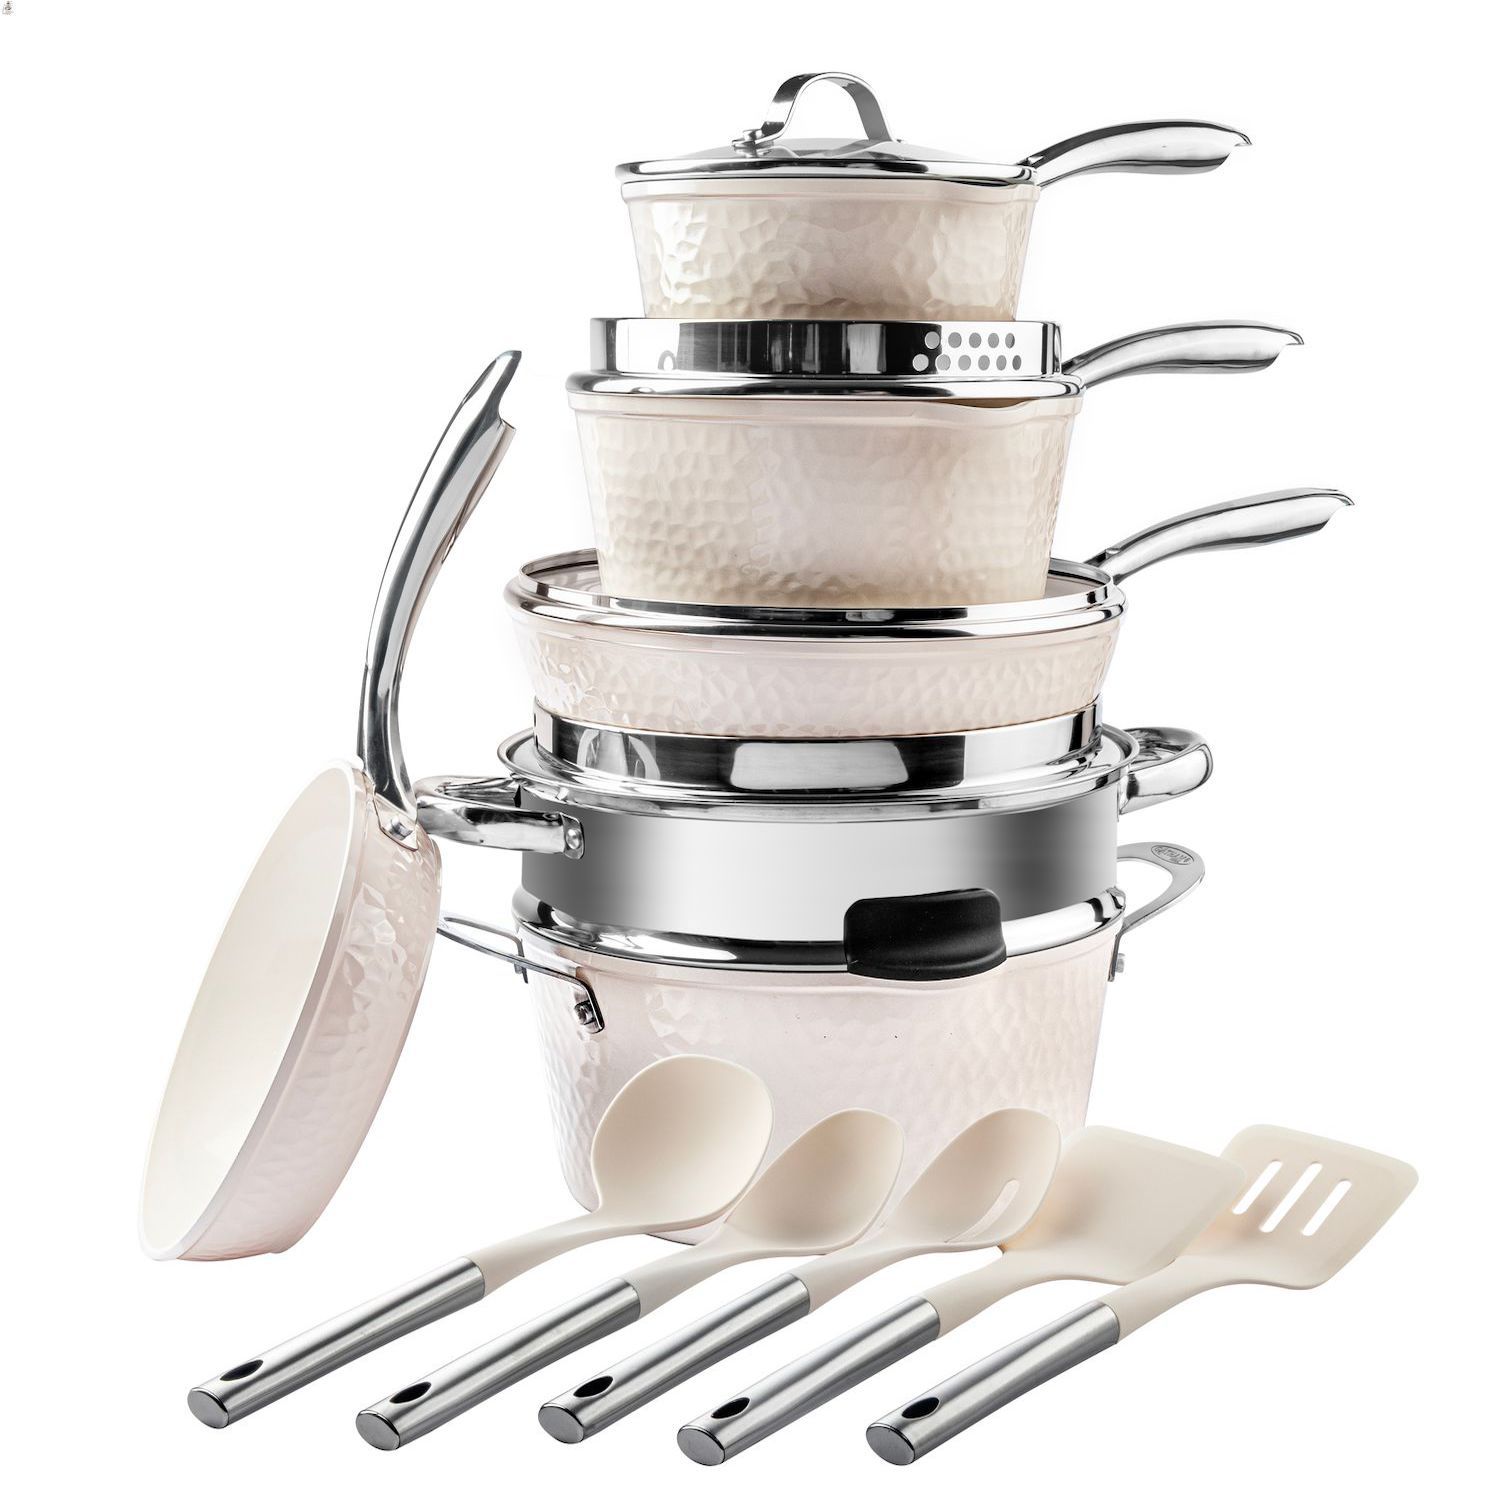 TeChef Cookware Set (Your Choice)